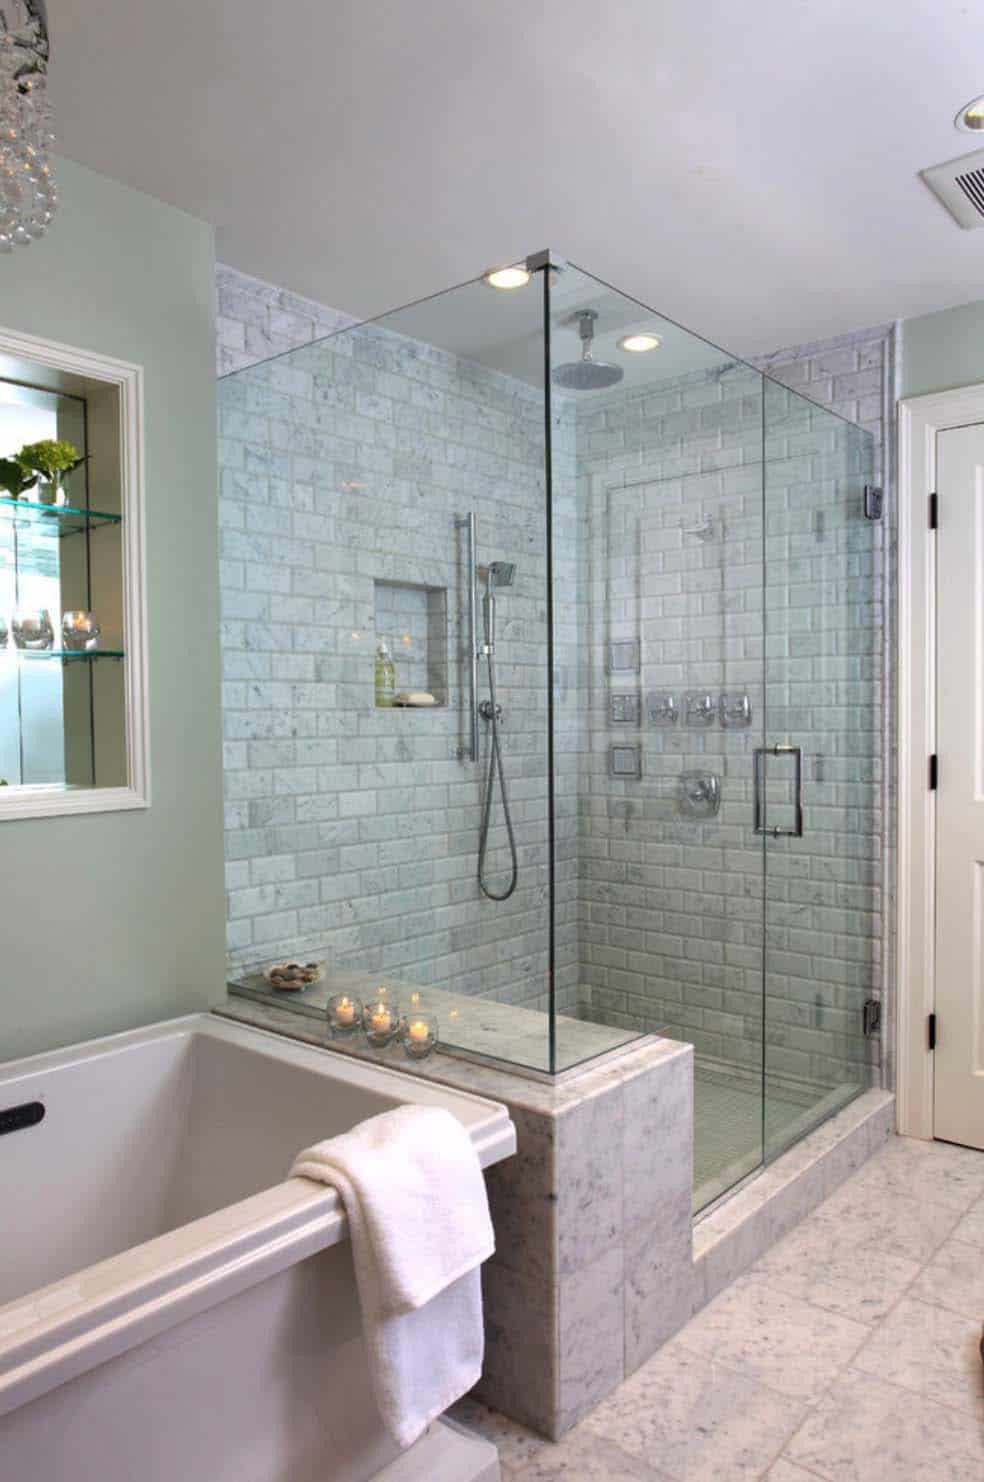 Bathroom Shower Designs
 53 Most fabulous traditional style bathroom designs ever